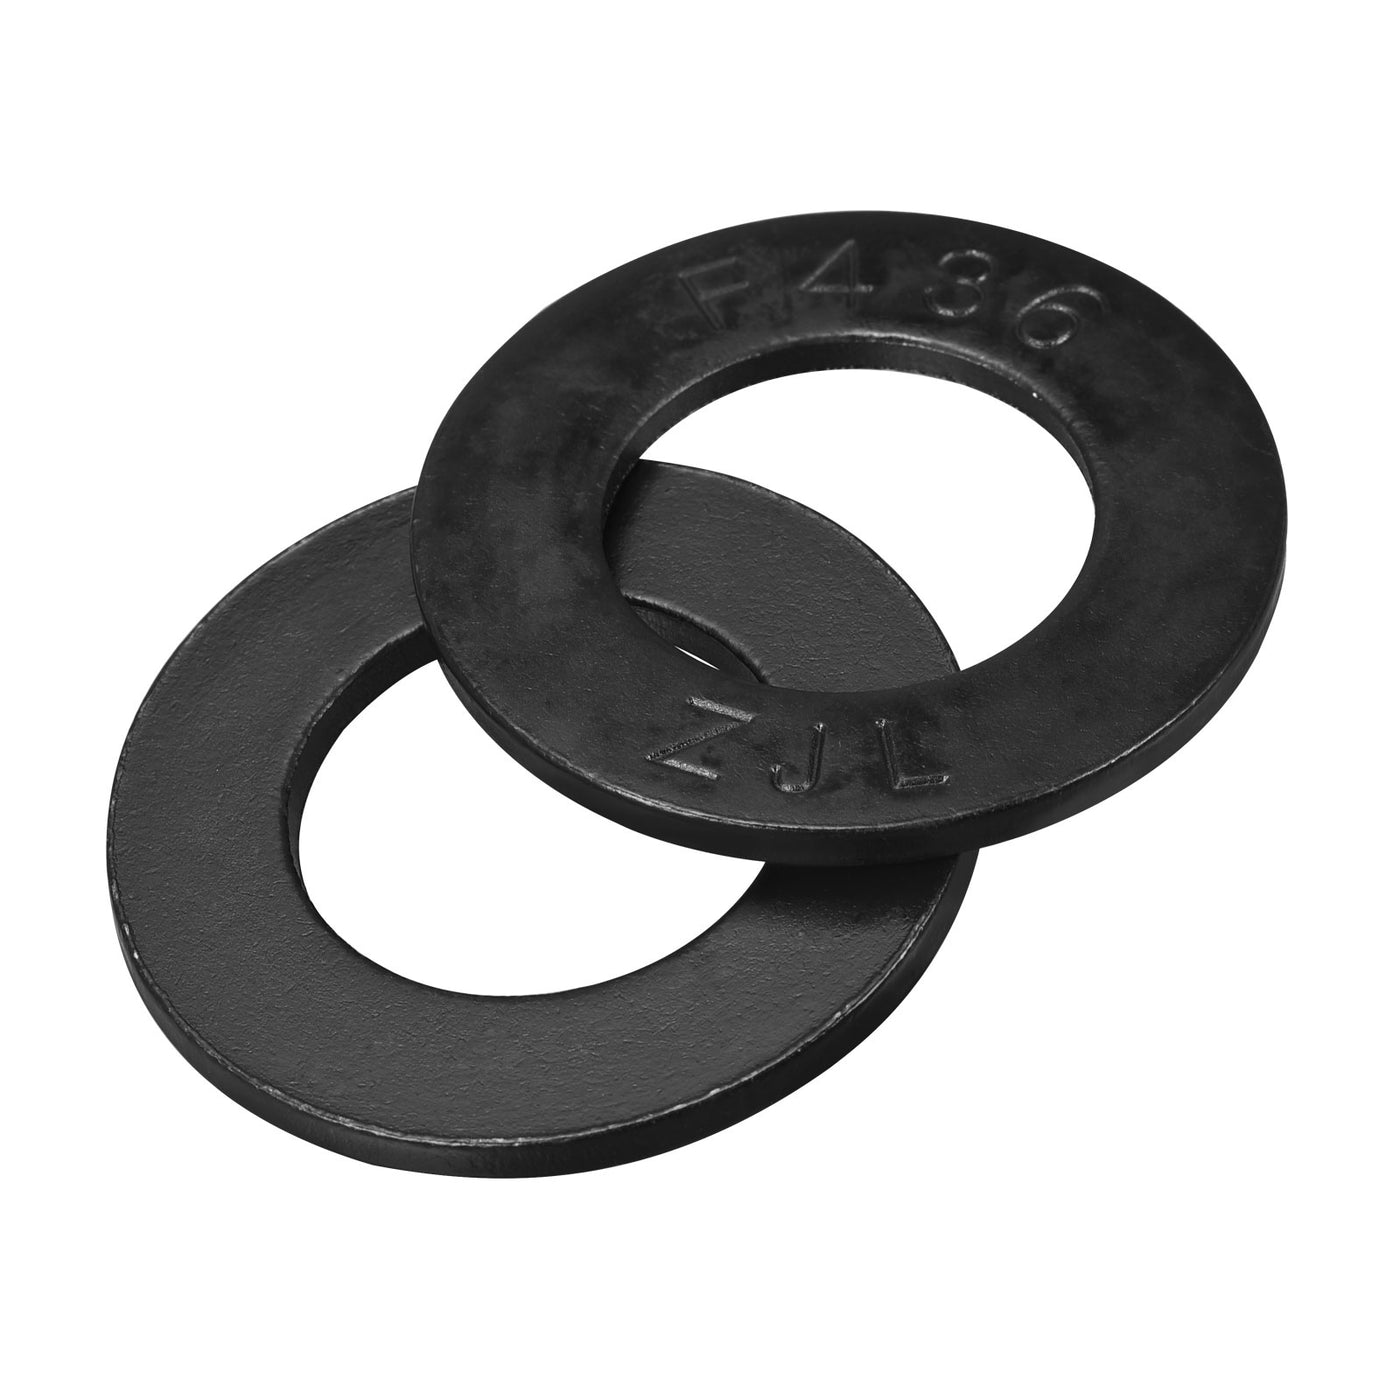 uxcell Uxcell 1-1/8-Inch Flat Washer, Alloy Steel Black Oxide Finish Pack of 10